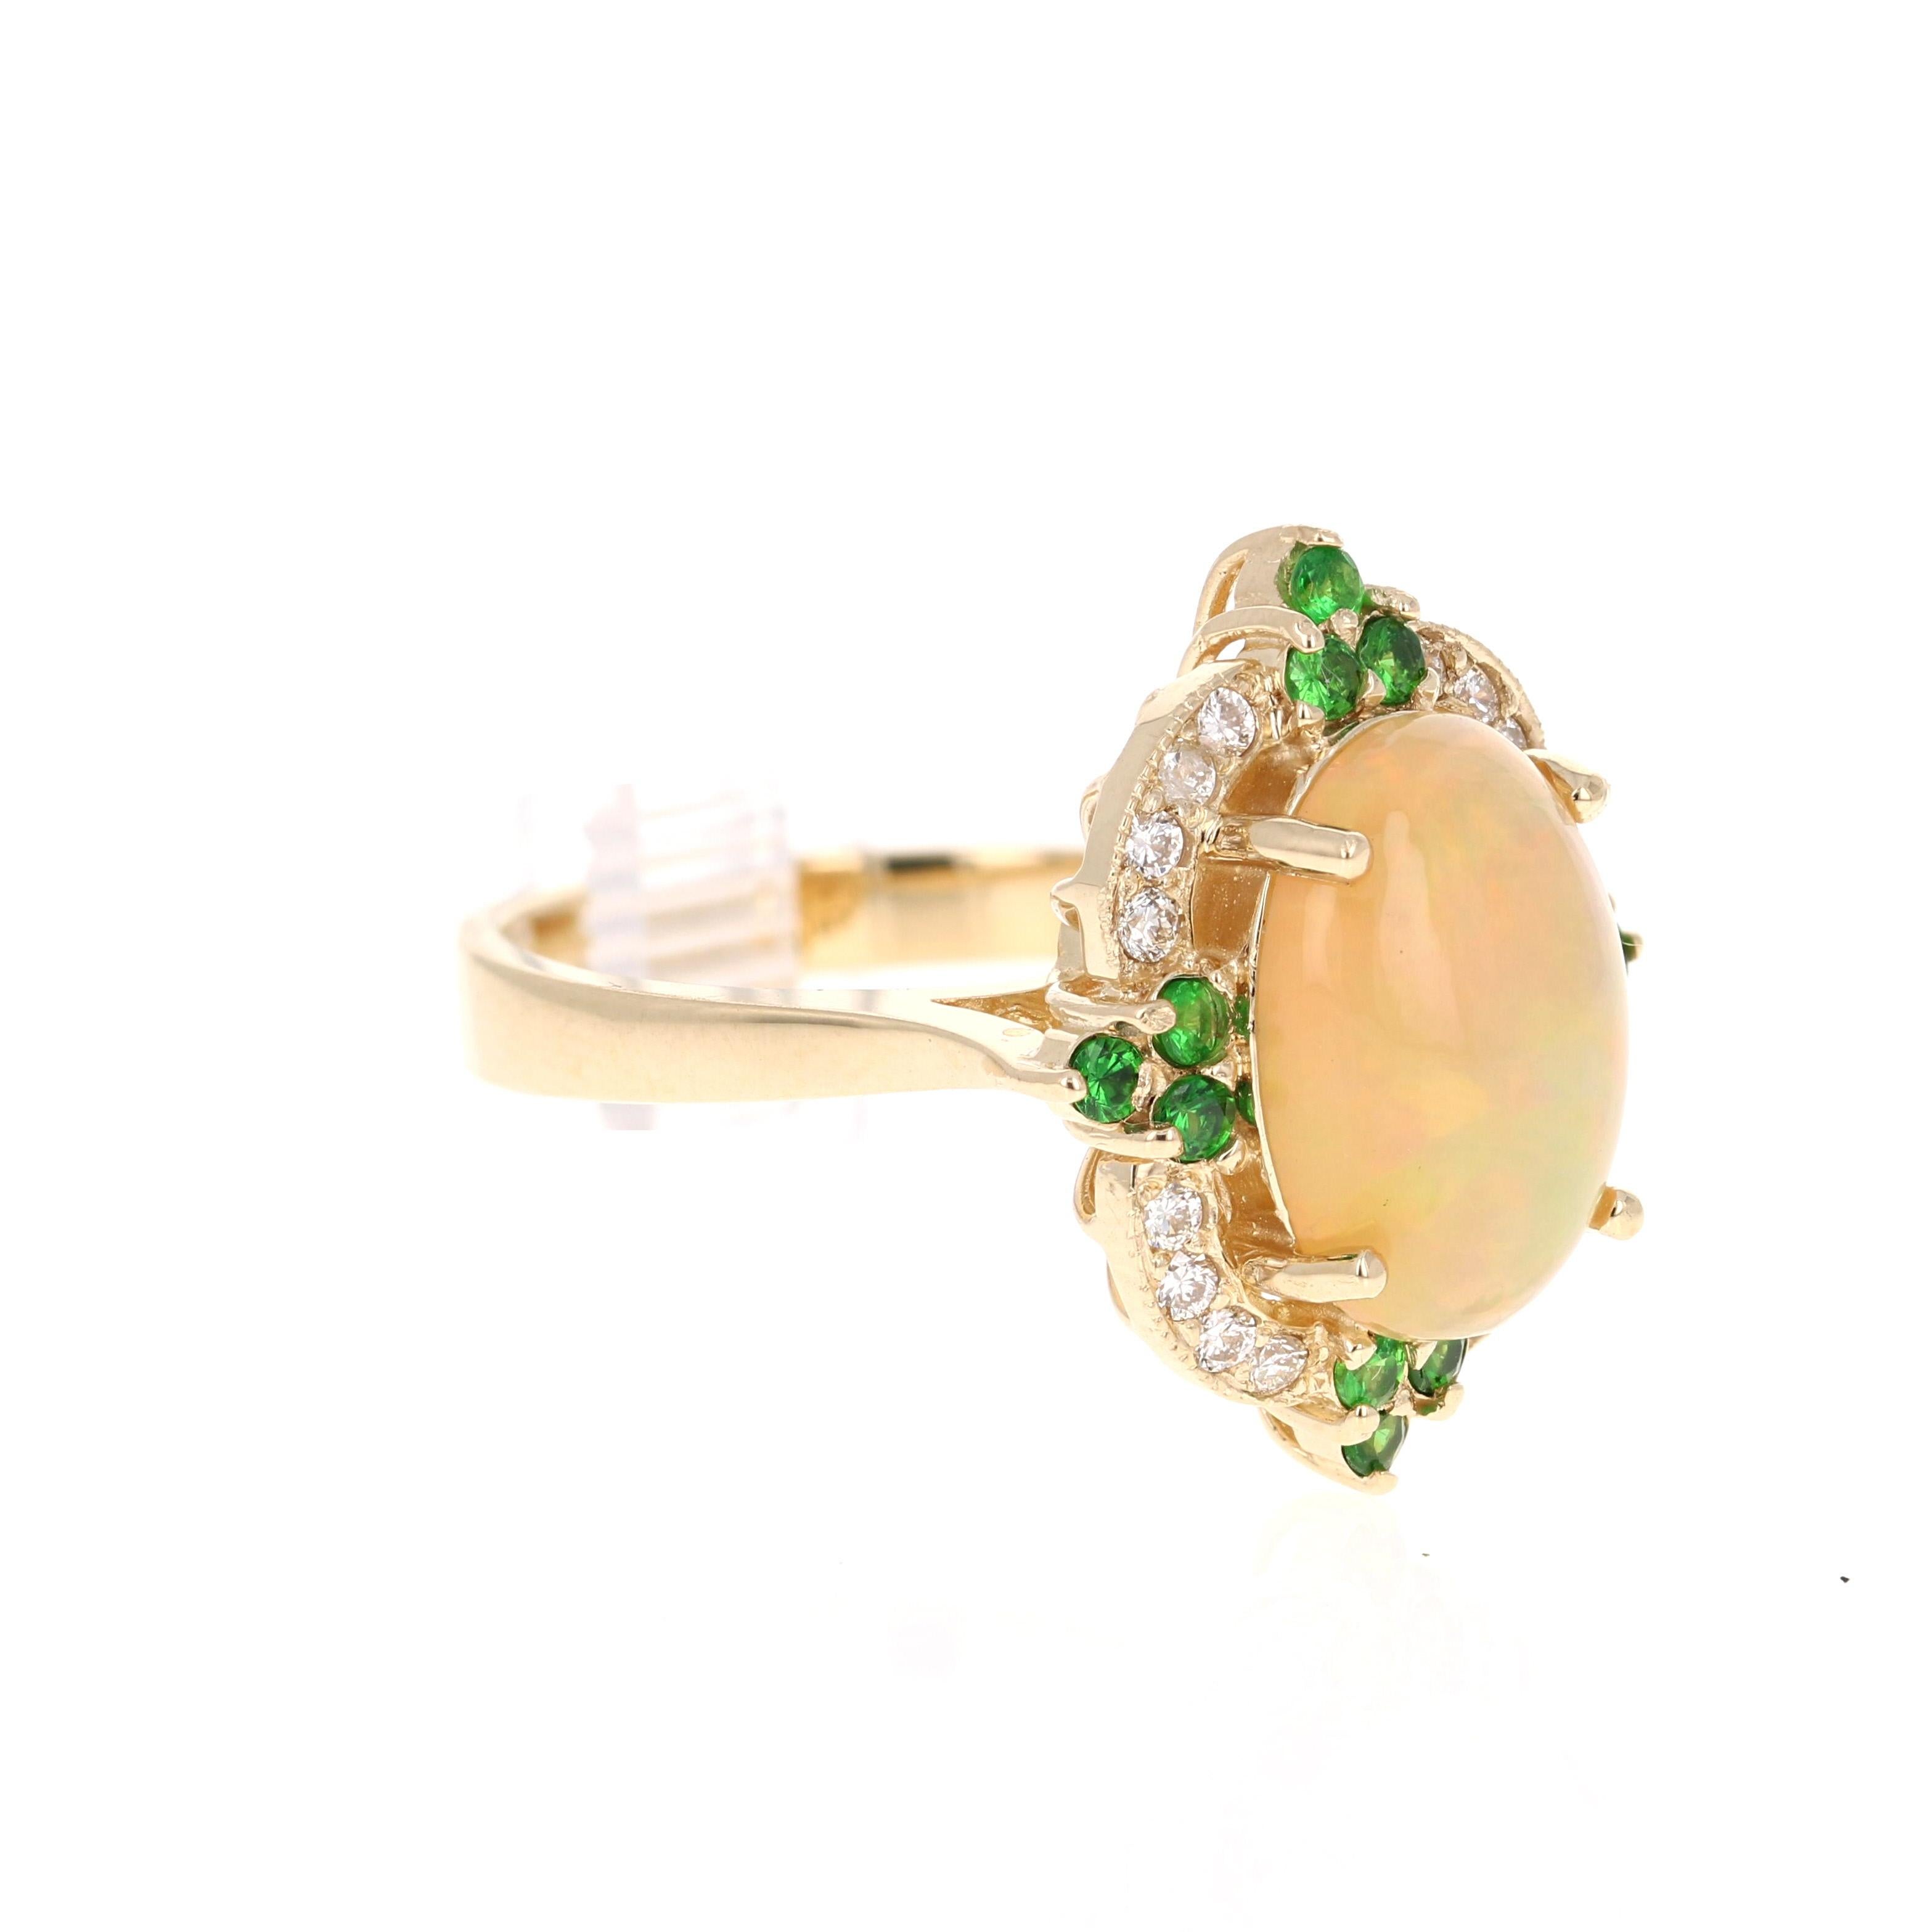 This gorgeous cocktail ring has a strinking Oval Cut Ethiopian Opal that weighs 2.78 Carats. The Opal measures approximately at 14 mm x 11 mm and has beautiful flashes of color in orange, green and yellow. 

The ring also has 12 Round Cut Tsavorites